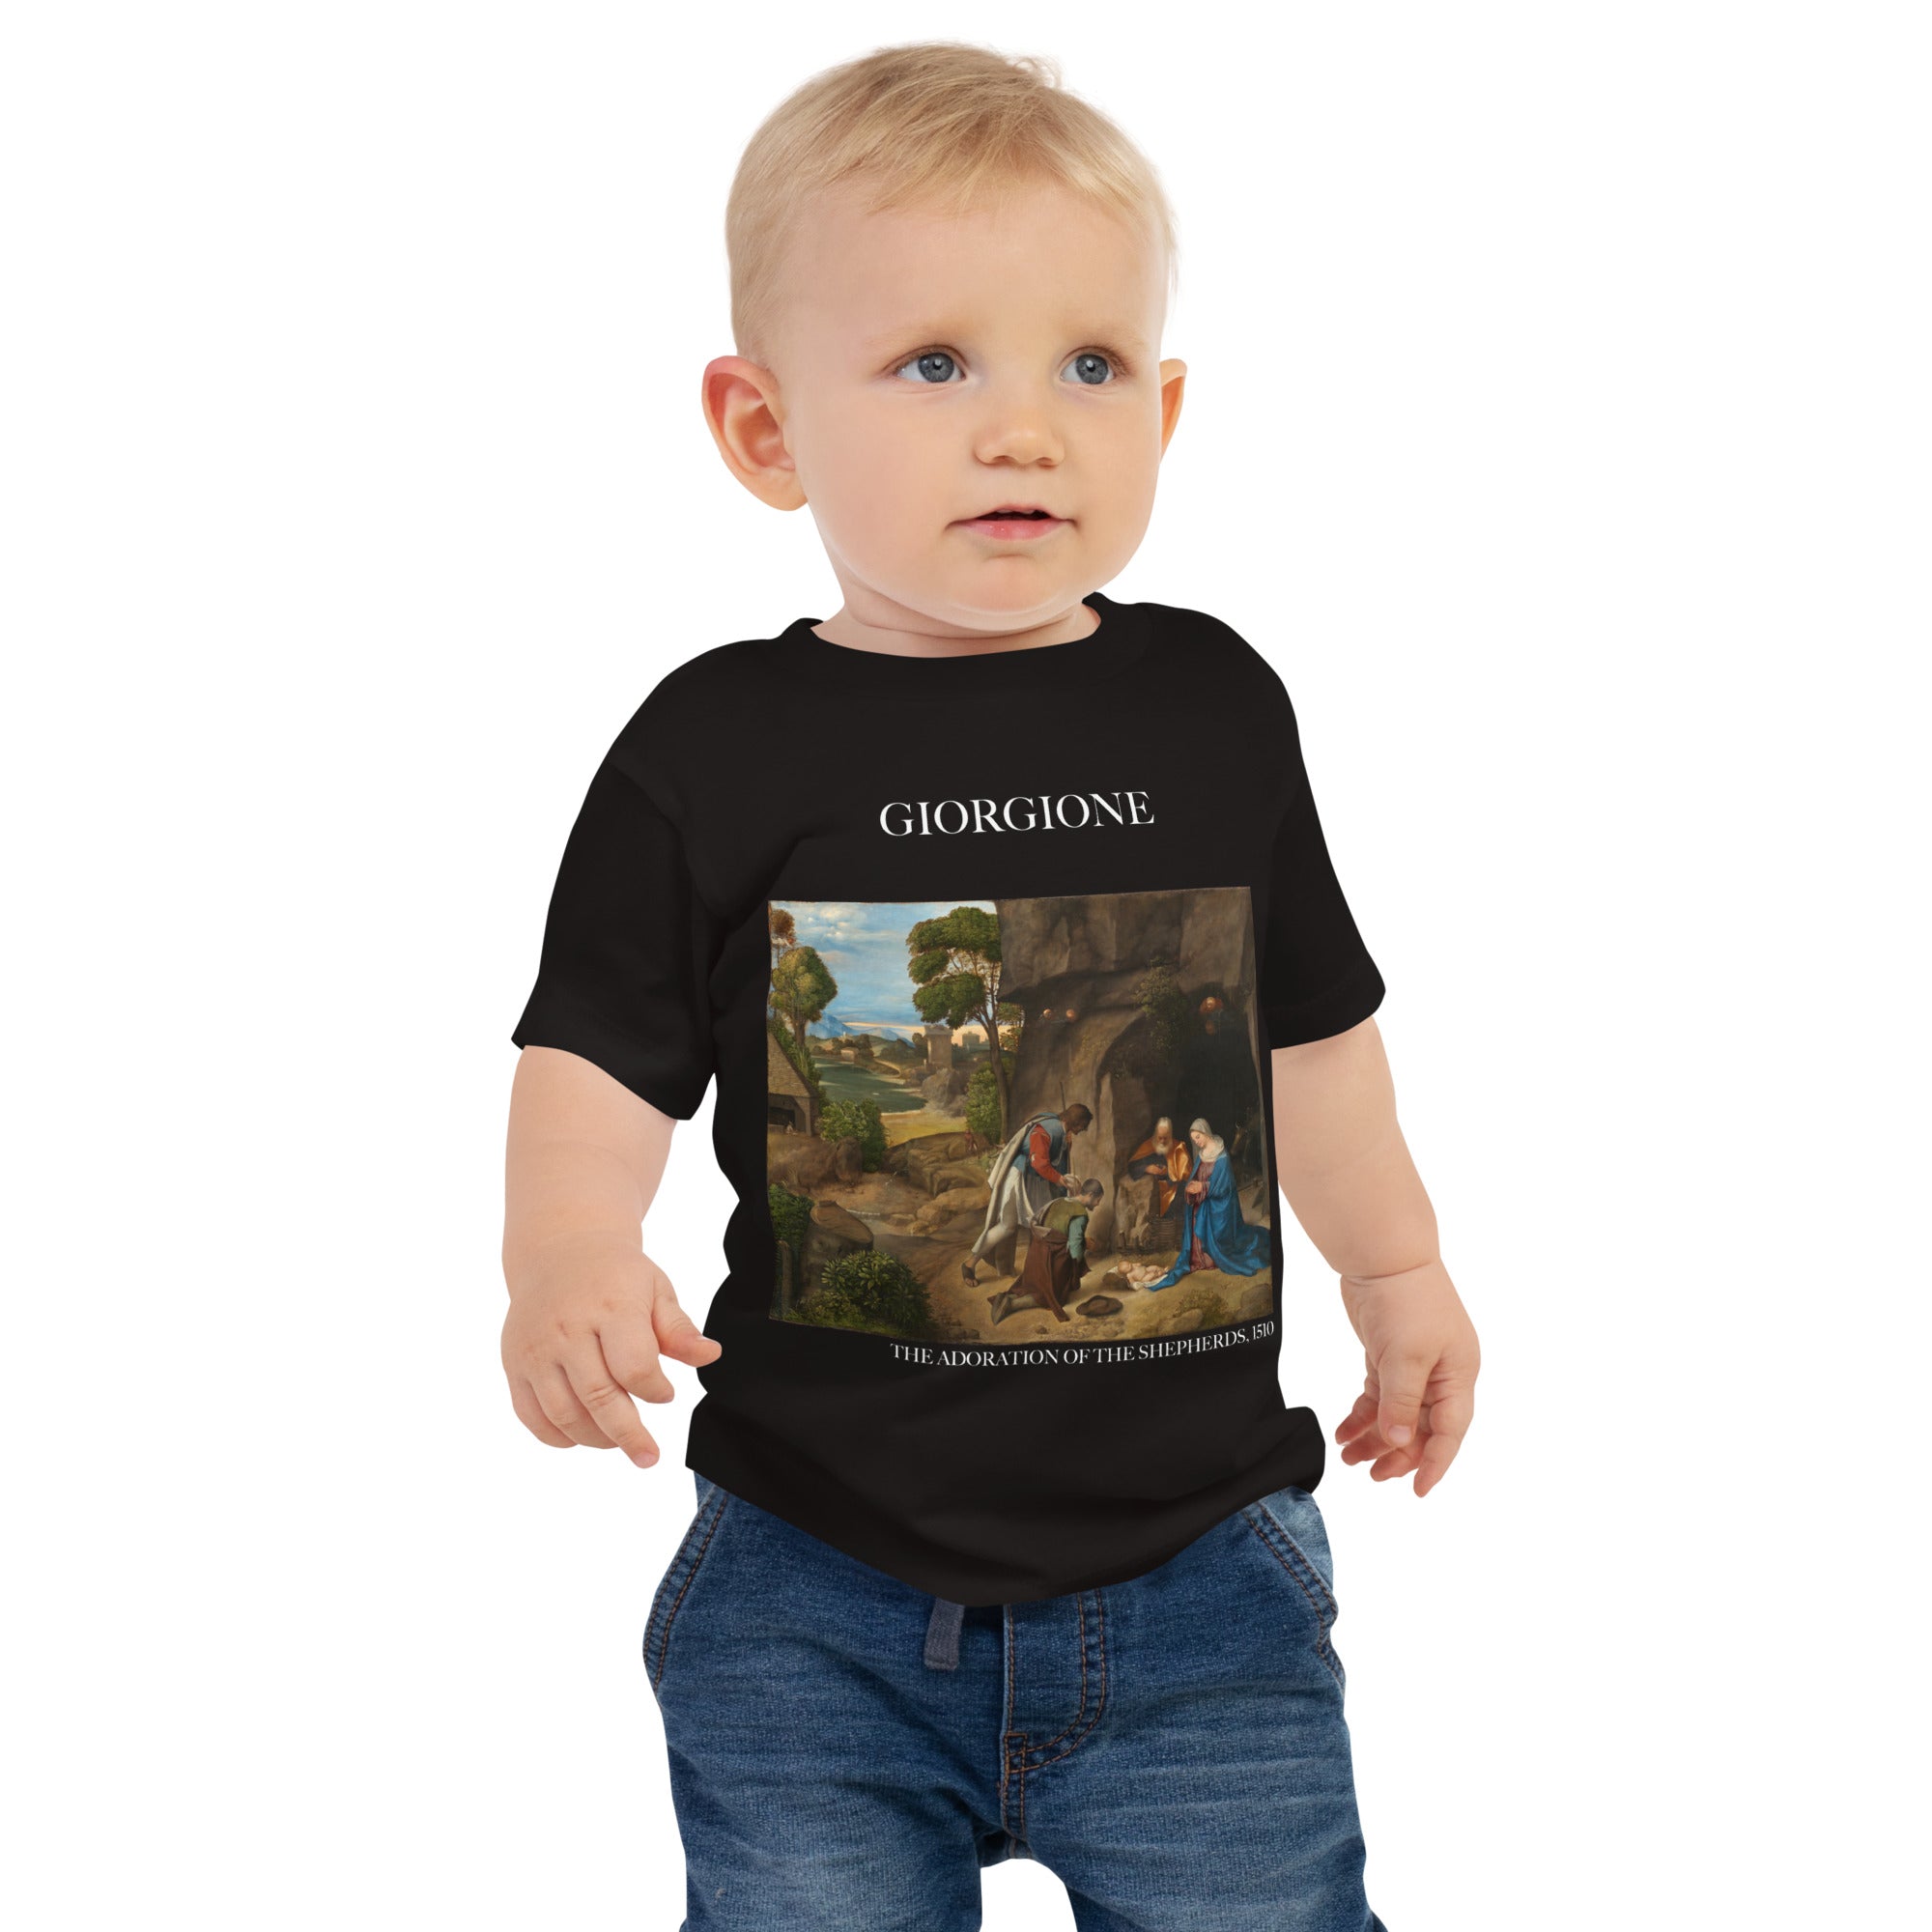 Giorgione 'The Adoration of the Shepherds' Famous Painting Baby Staple T-Shirt | Premium Baby Art Tee